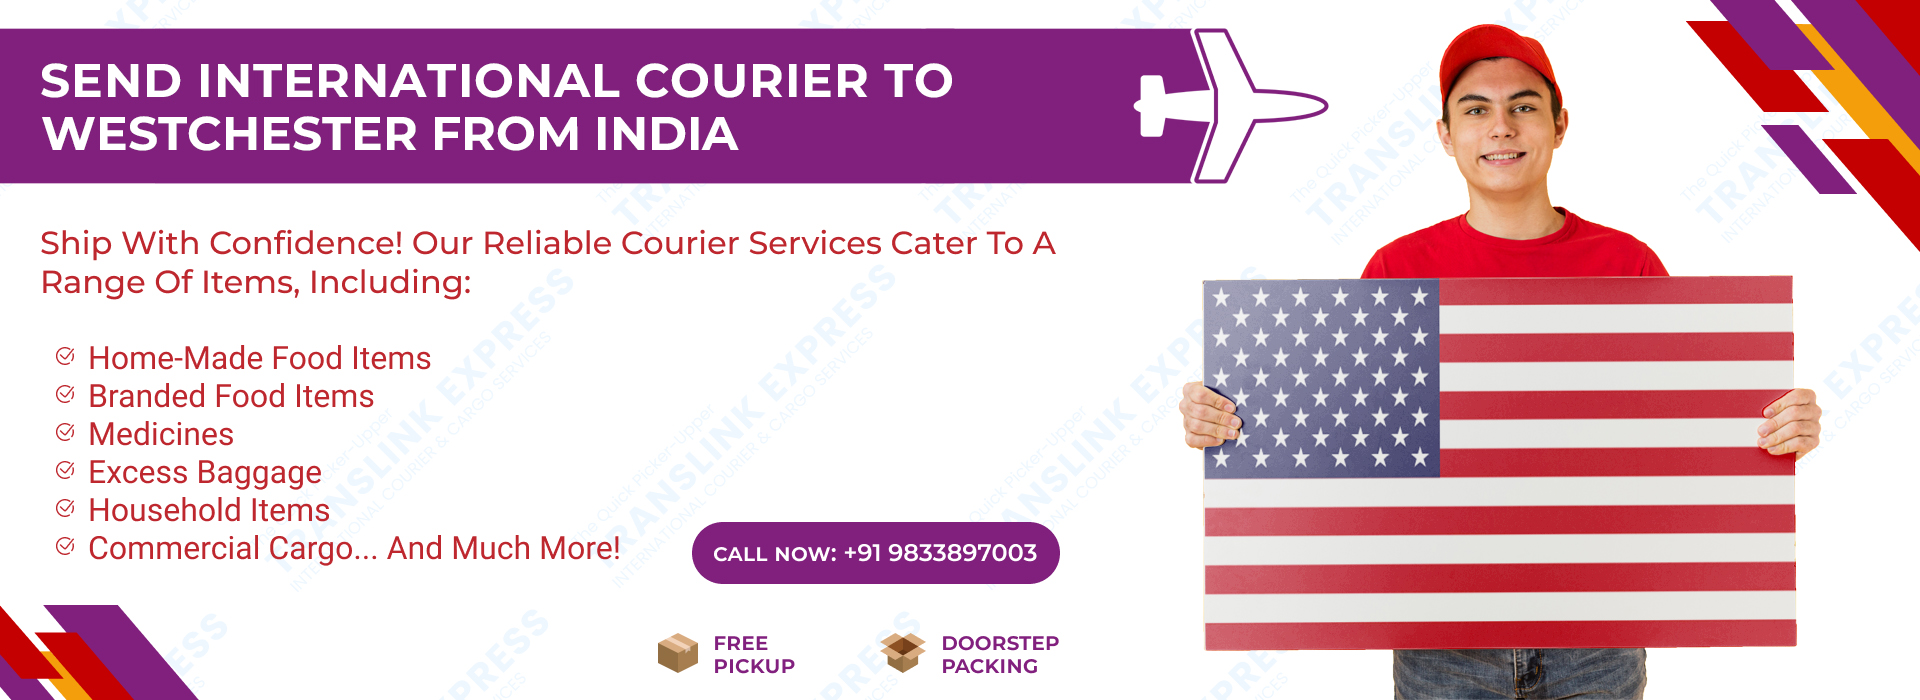 Courier to Westchester From India